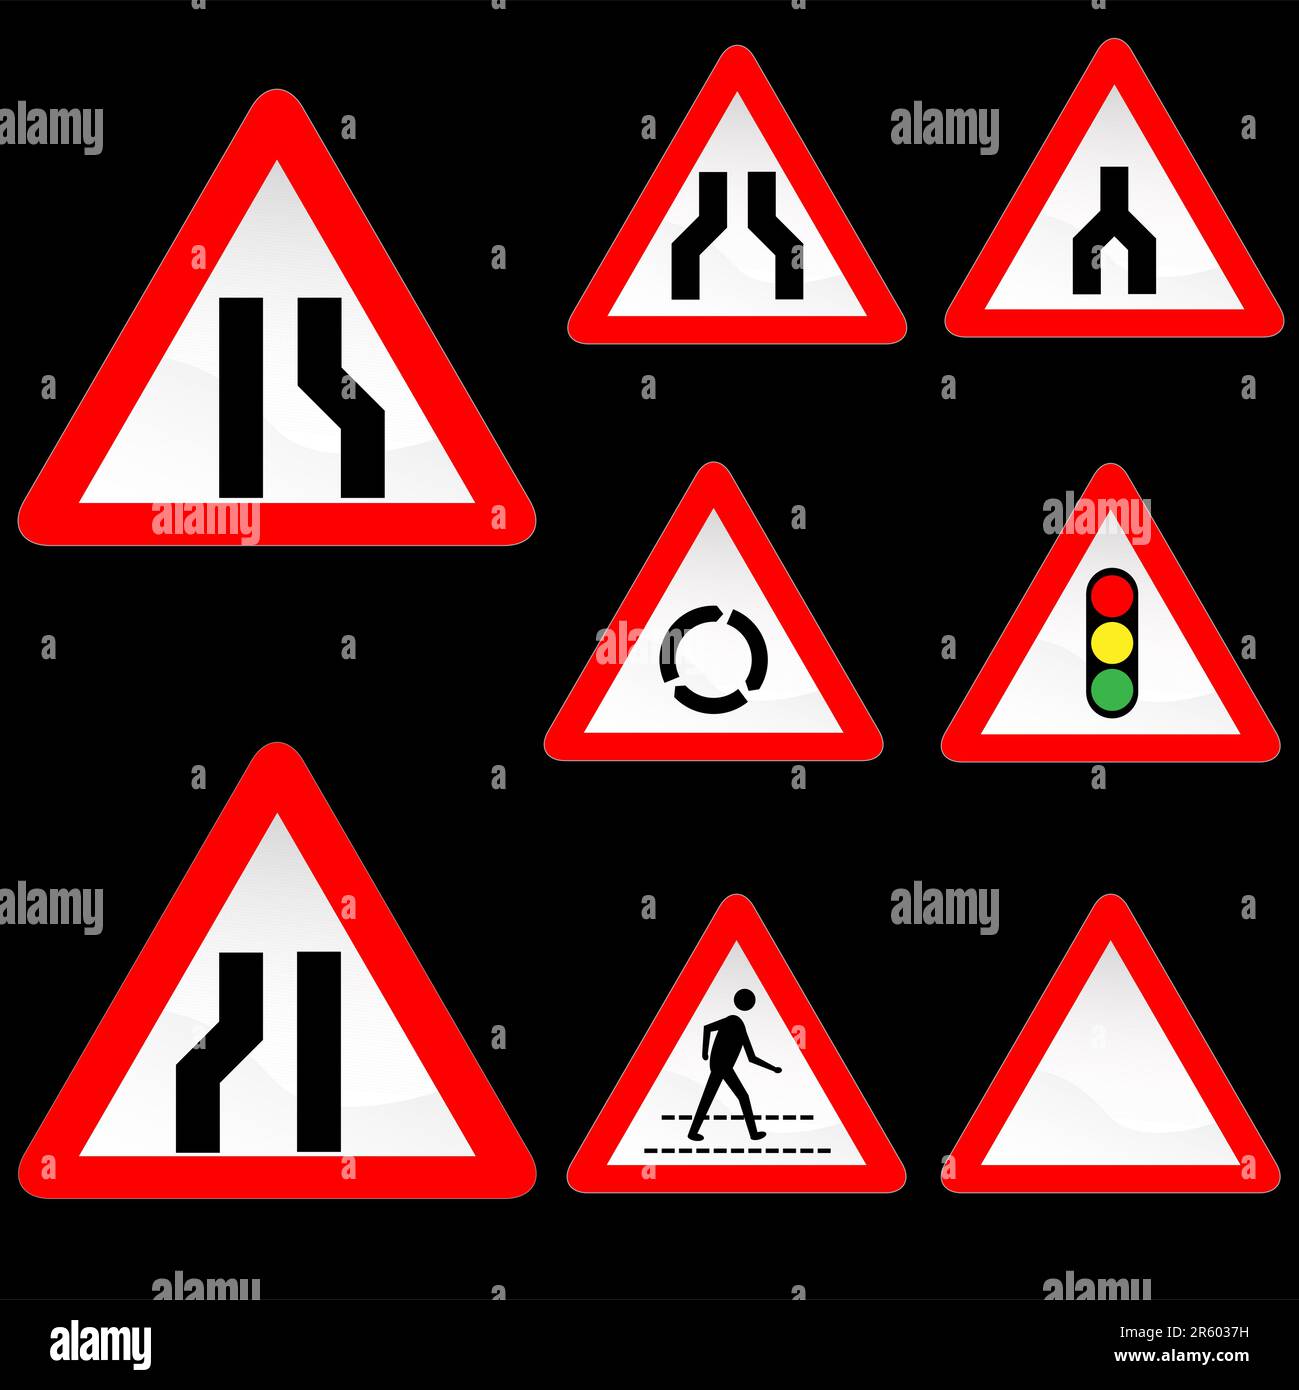 Vector Illustration of Eight Triangle Shape Red White Road Signs Set 3 Stock Vector